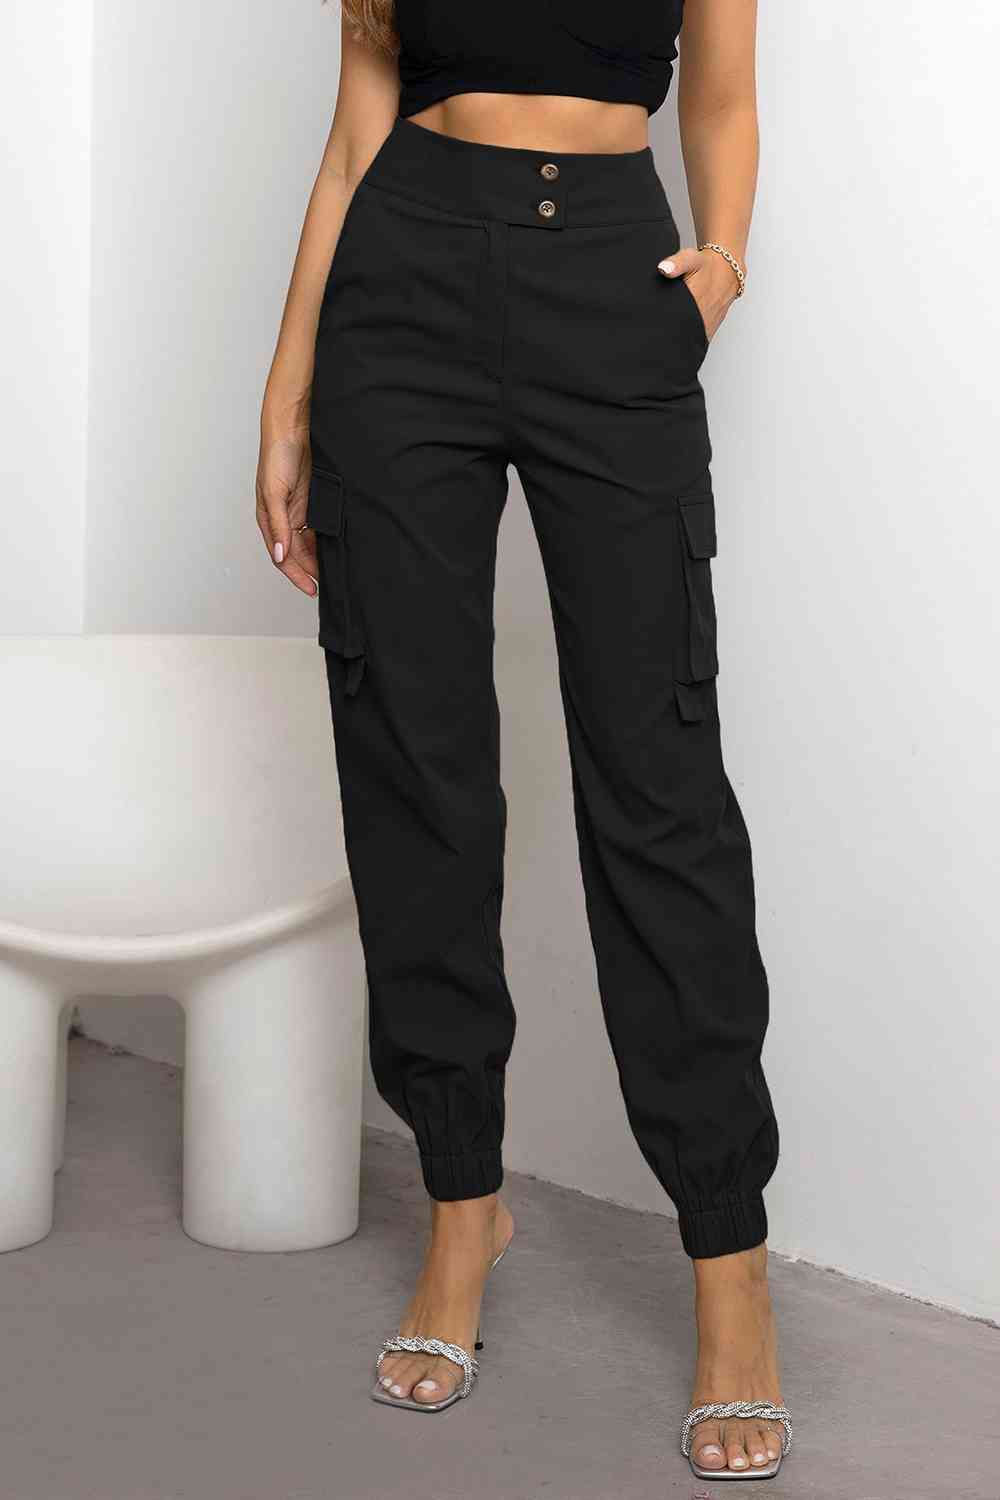 High Waist Cargo Pants -  - Wild Willows Boutique - Massapequa, NY, affordable and fashionable clothing for women of all ages. Bottoms, tops, dresses, intimates, outerwear, sweater, shoes, accessories, jewelry, active wear, and more // Wild Willow Boutique.